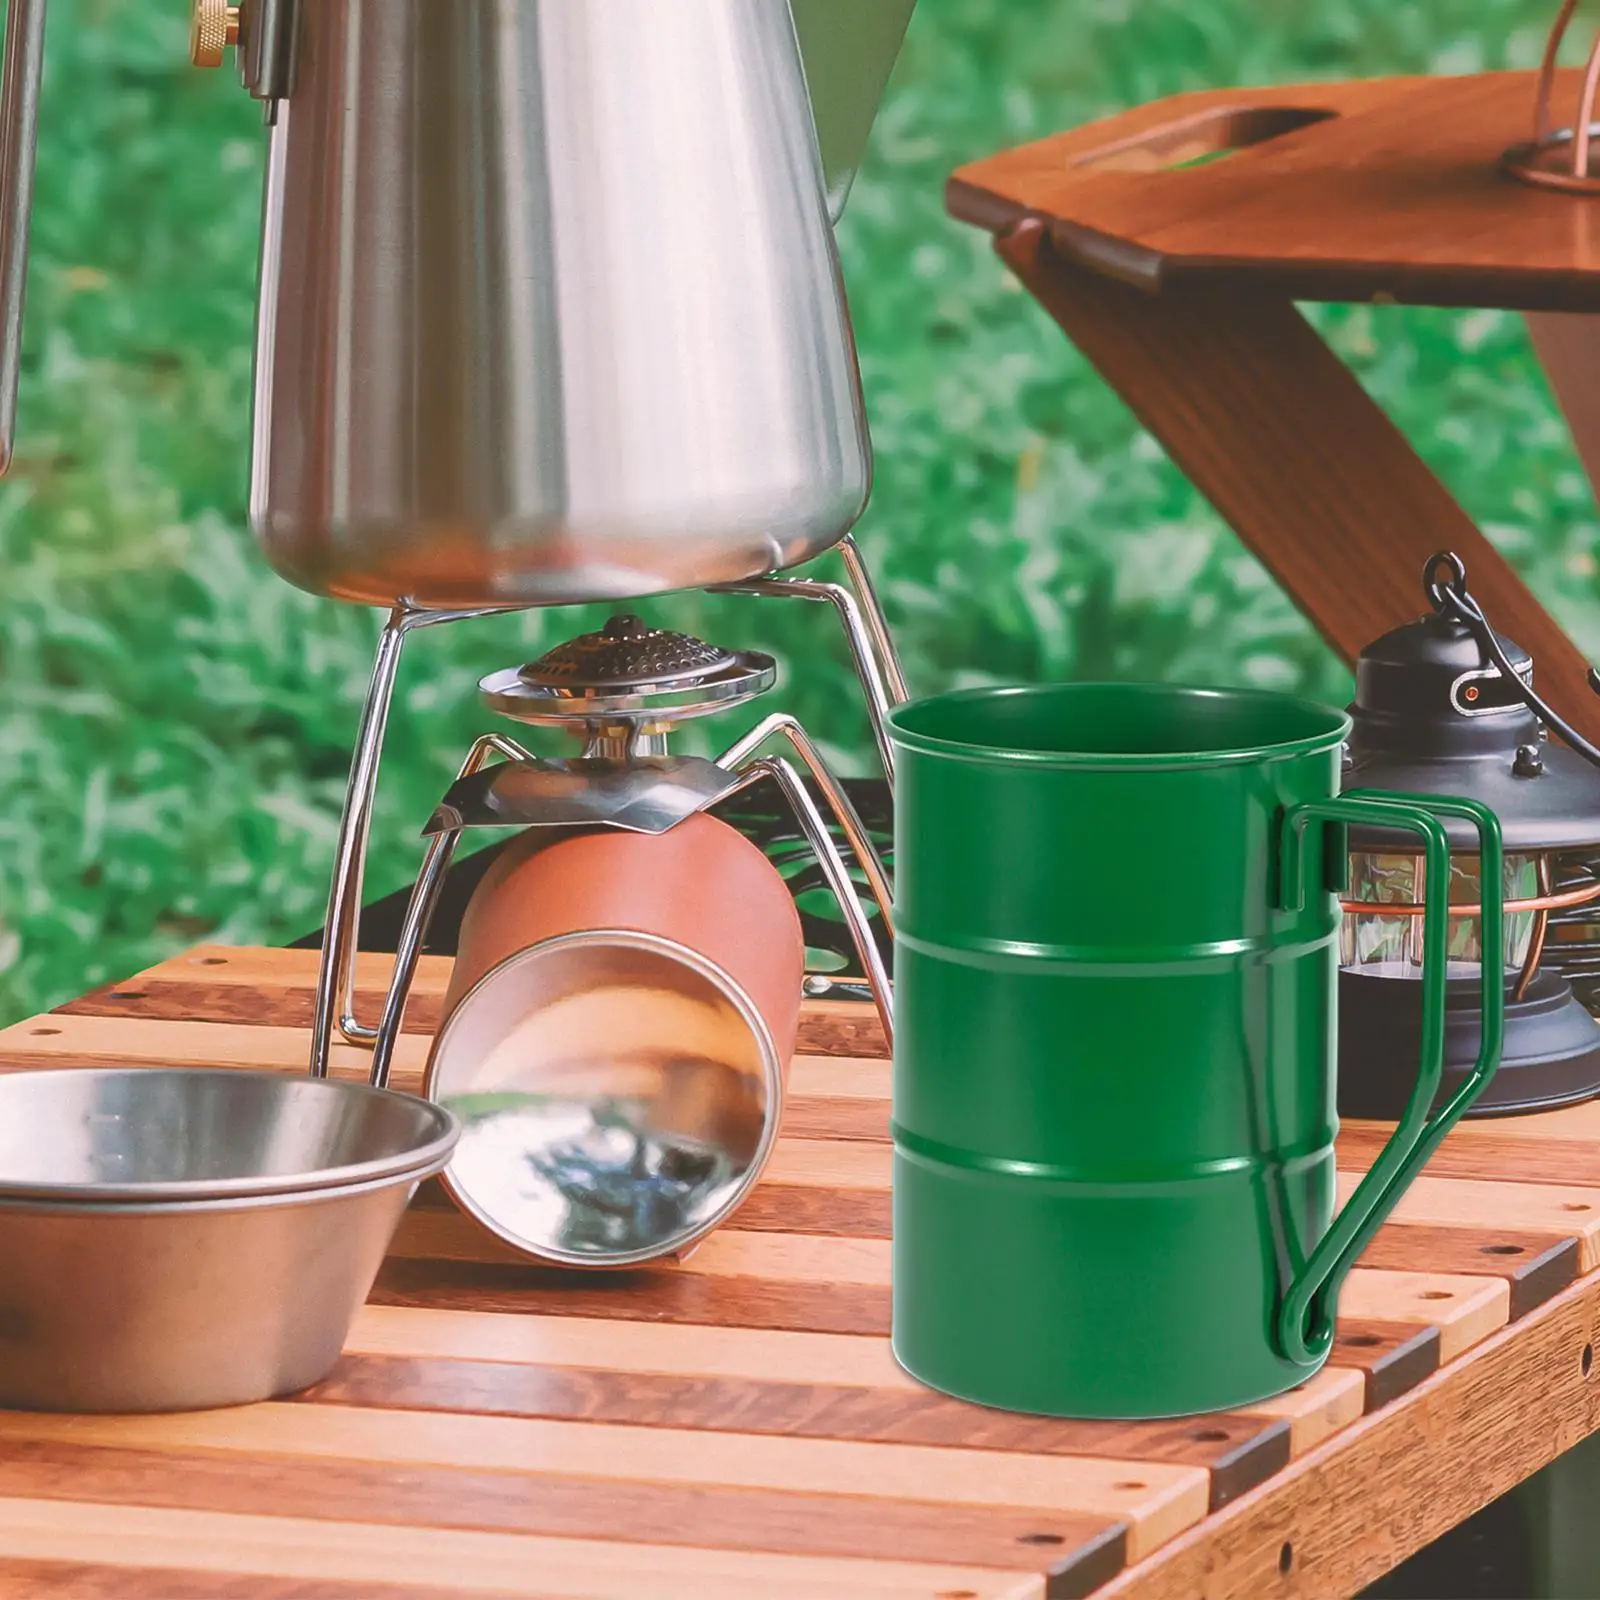 Stainless Steel Camping Mug Cooking Pot Reusable Coffee Cup Gift Vintage Style Beer Mug for Travel Hiking Picnic Outdoor Garden